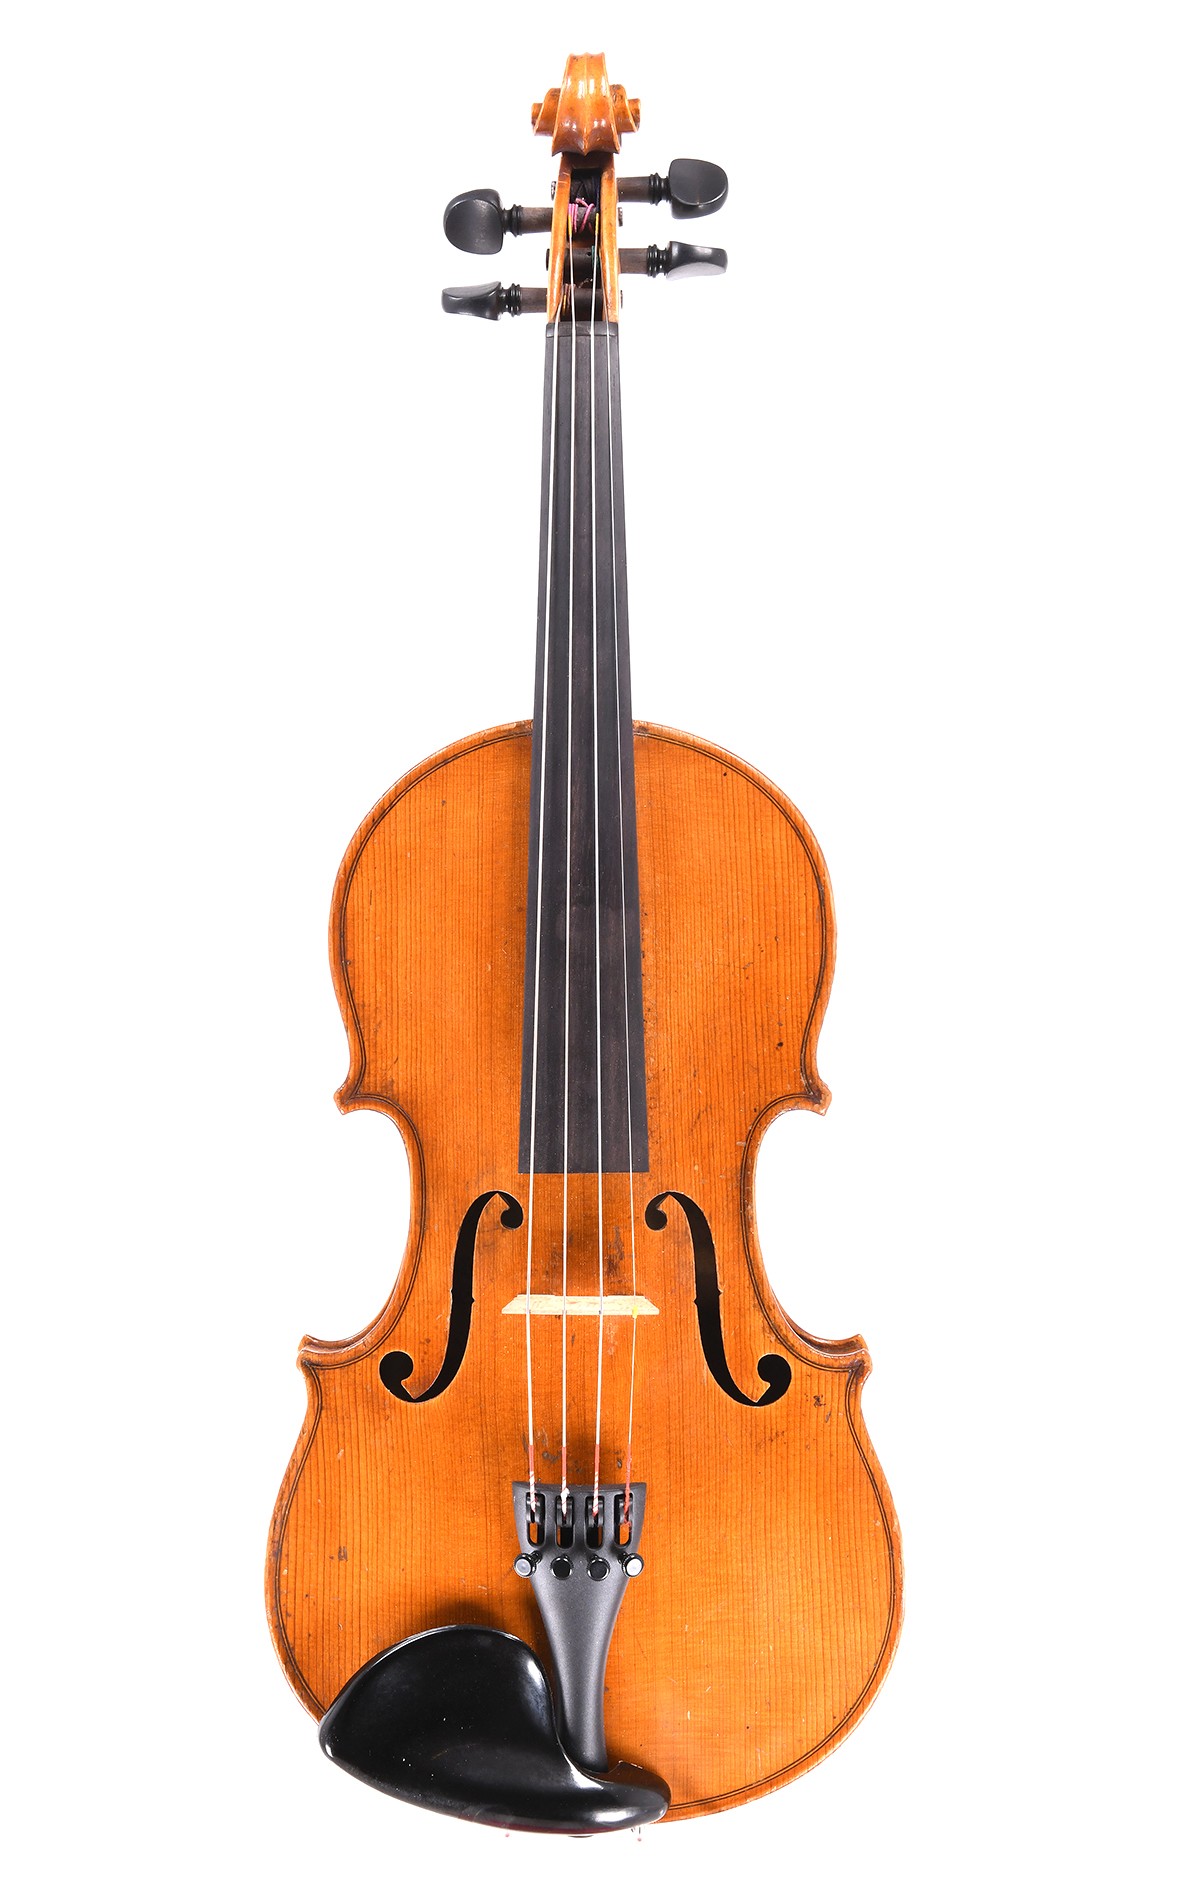 Finding a student violin in the proper size | Practical ...